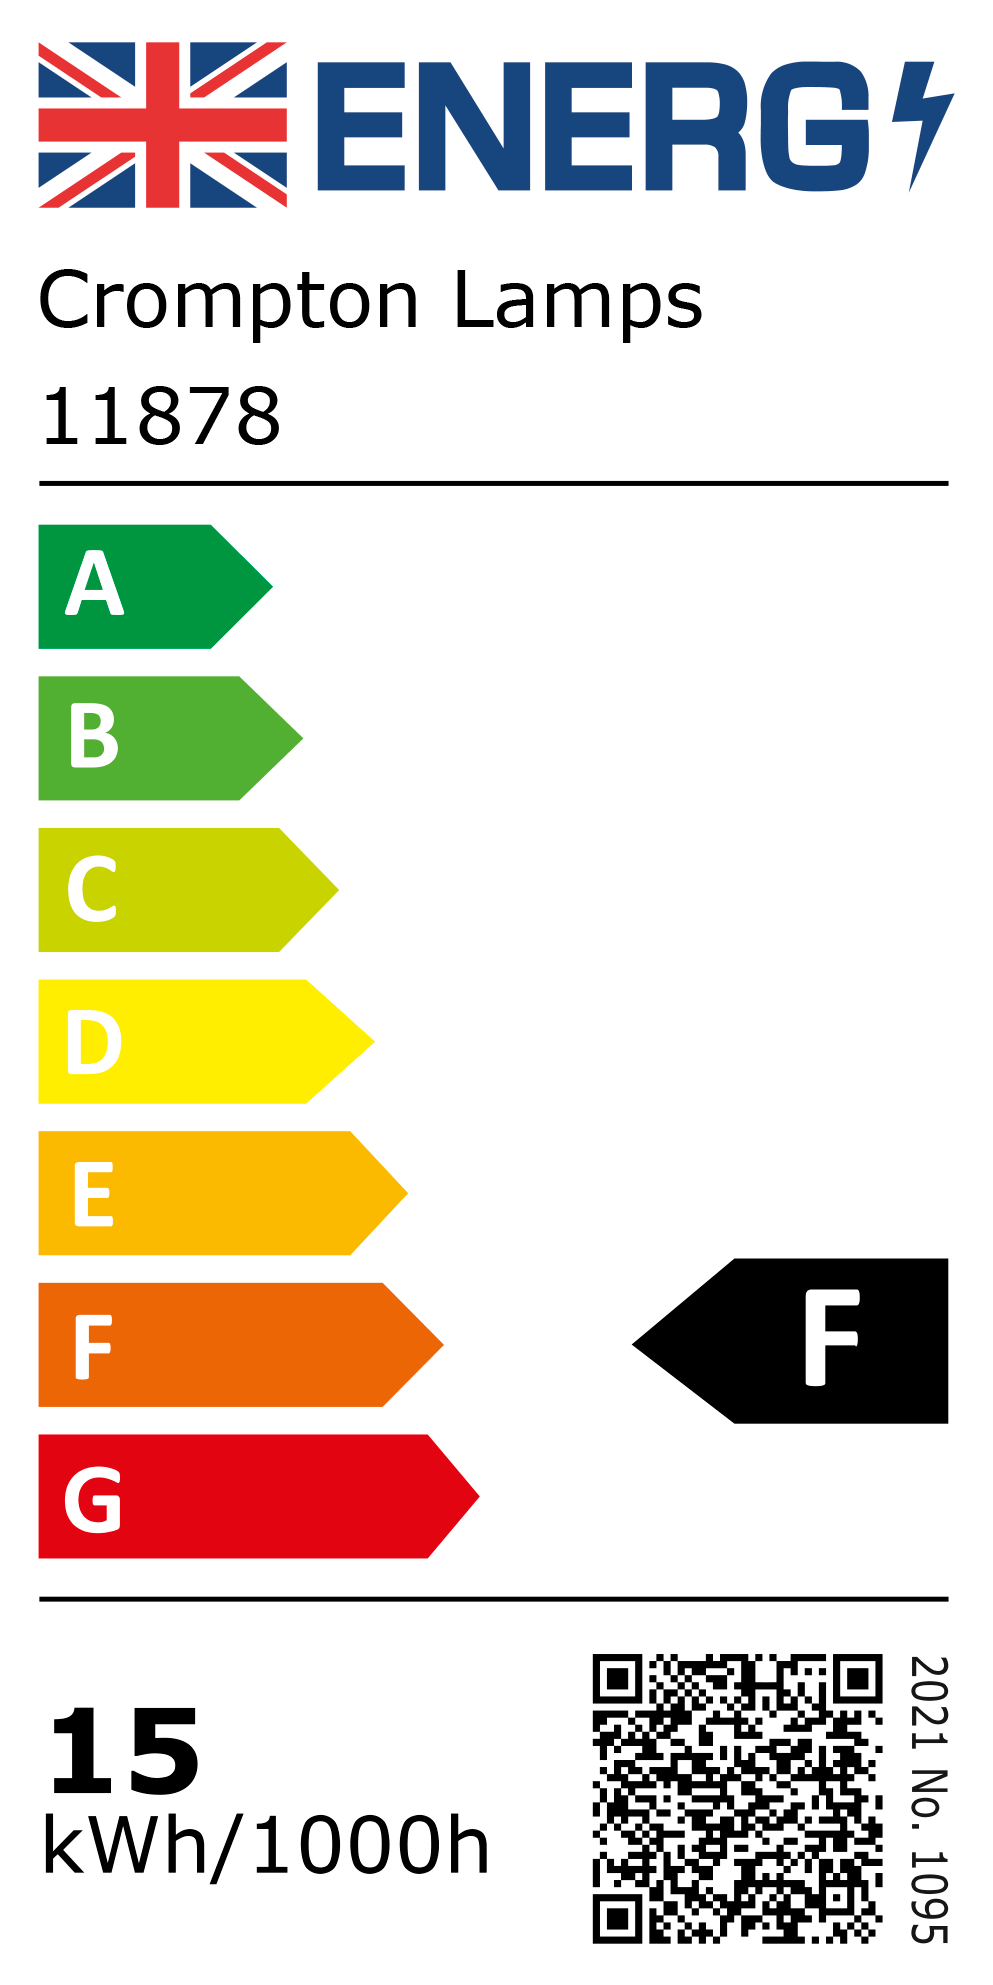 New 2021 Energy Rating Label: Stock Code 11878